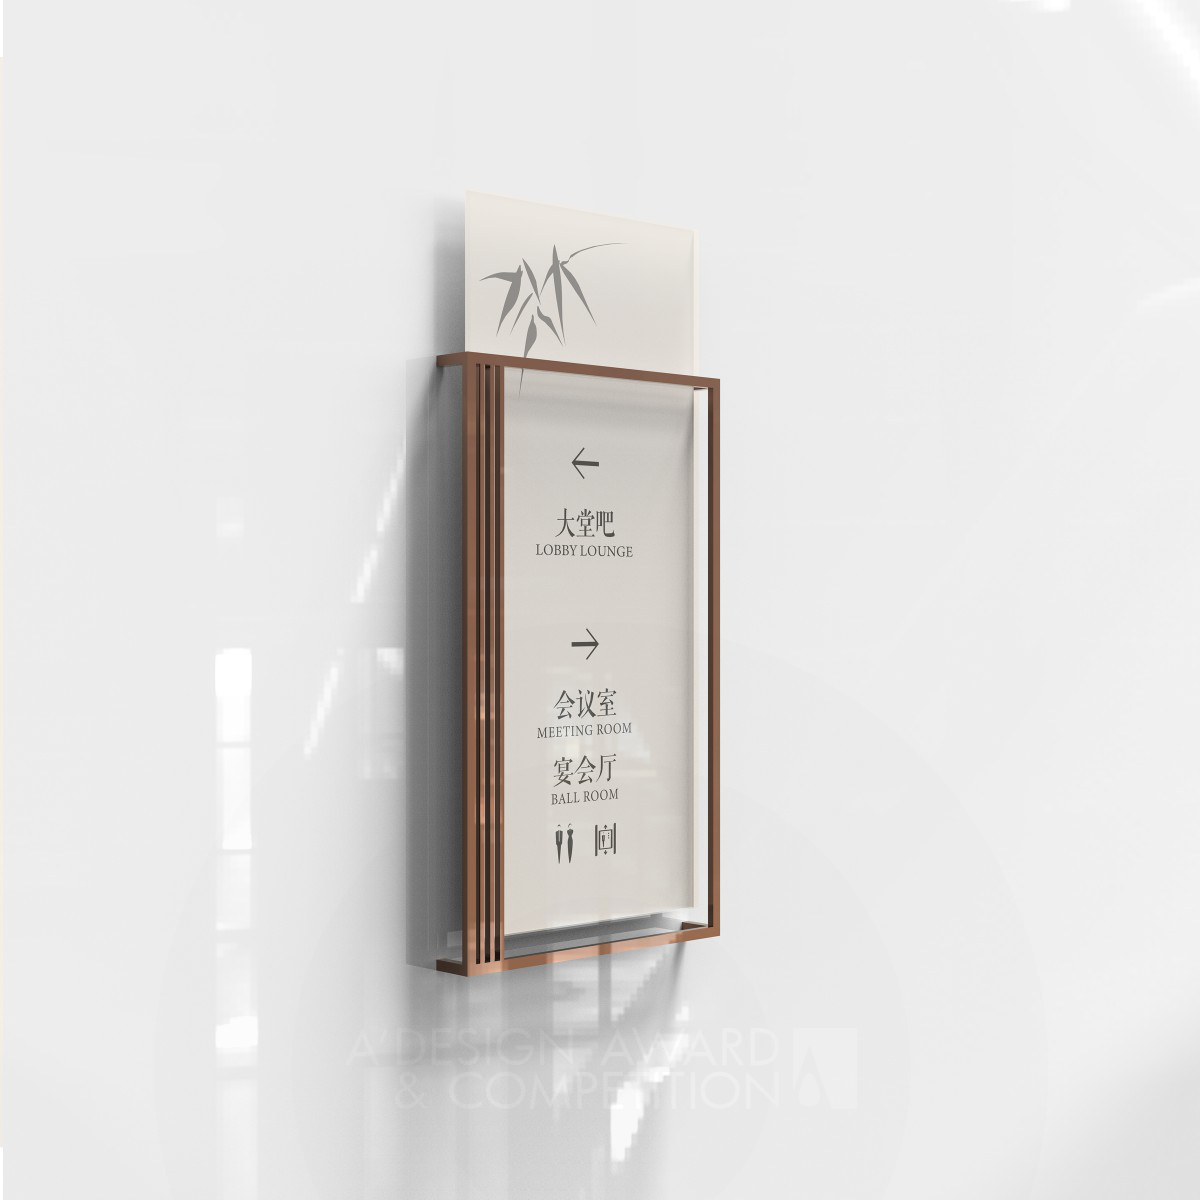 Fengqi Gong wins Bronze at the prestigious A' Building Materials and Construction Components Design Award with Bamboo Sound Wayfinding System.